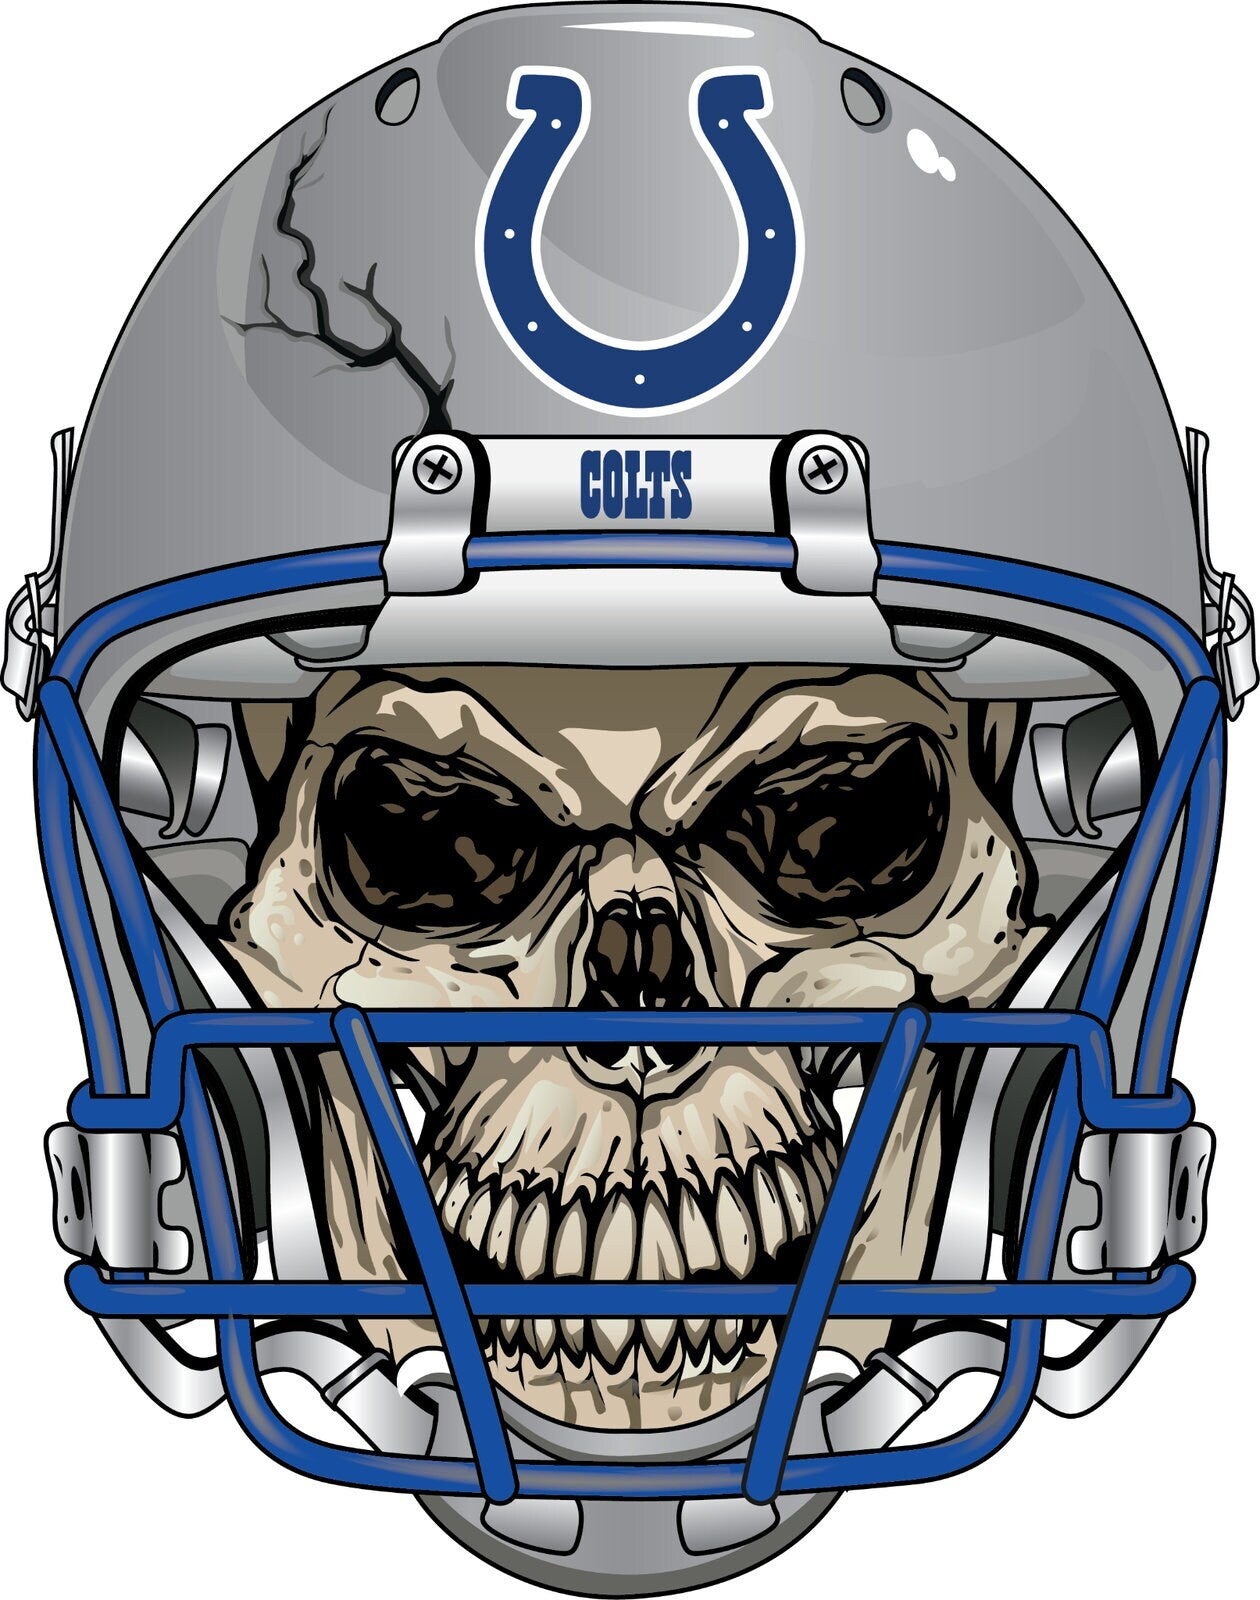 Indianapolis Colts Skull Helmet Large Print  - Car Wall Decal Small to X Large Print